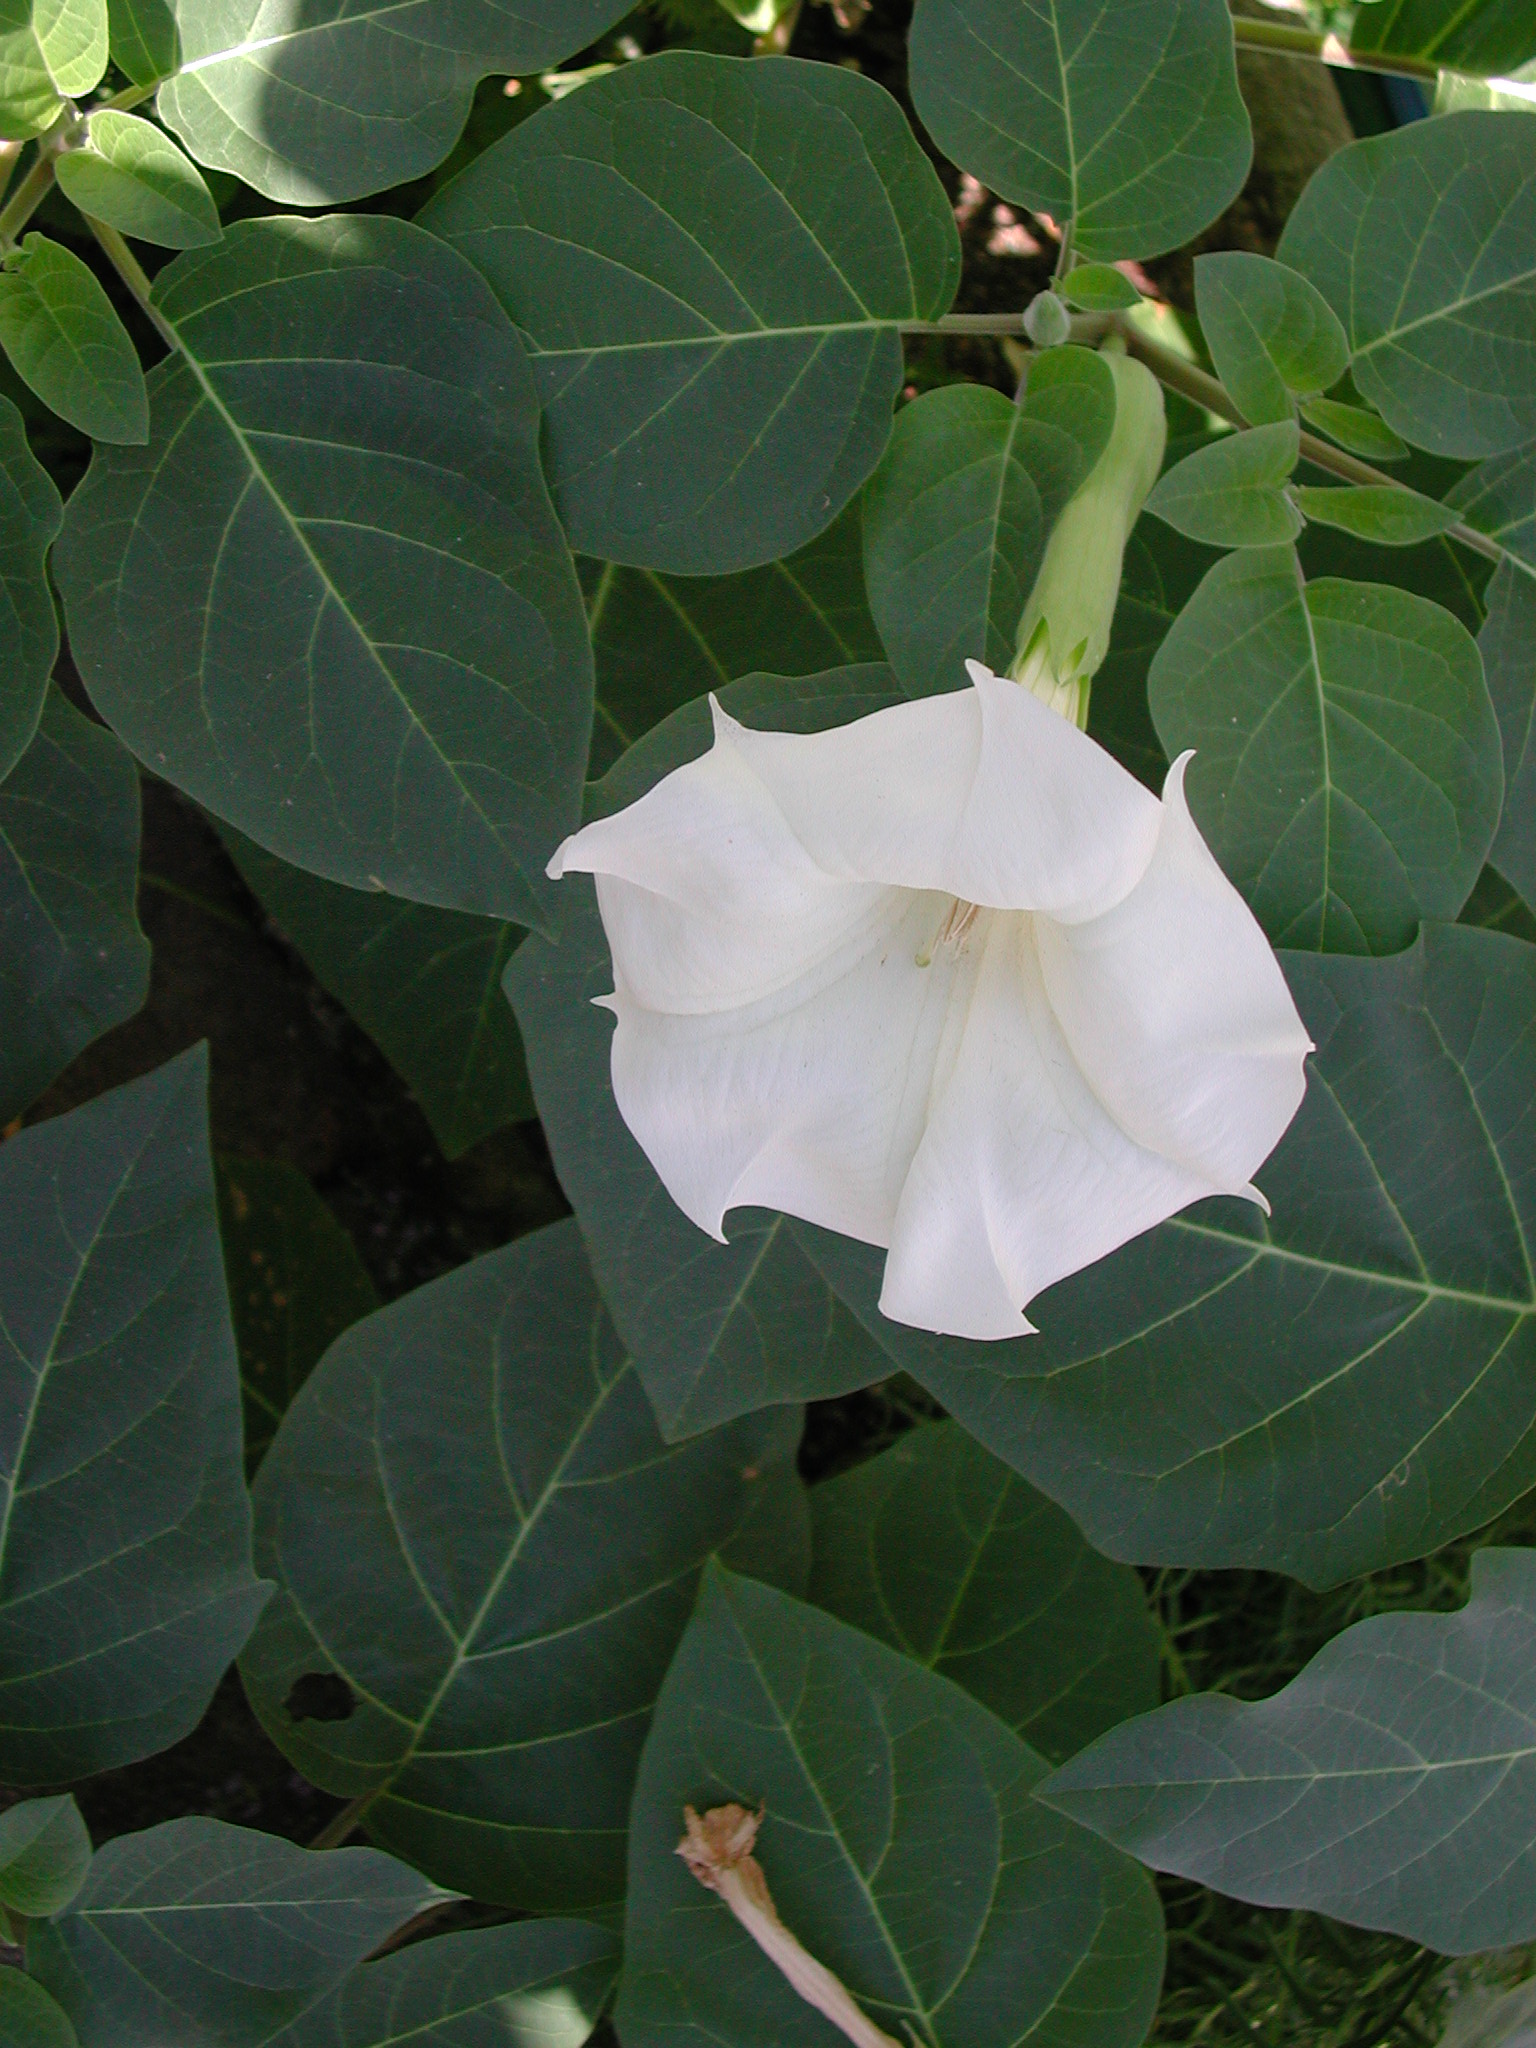 the small white flower is surrounded by large green leaves